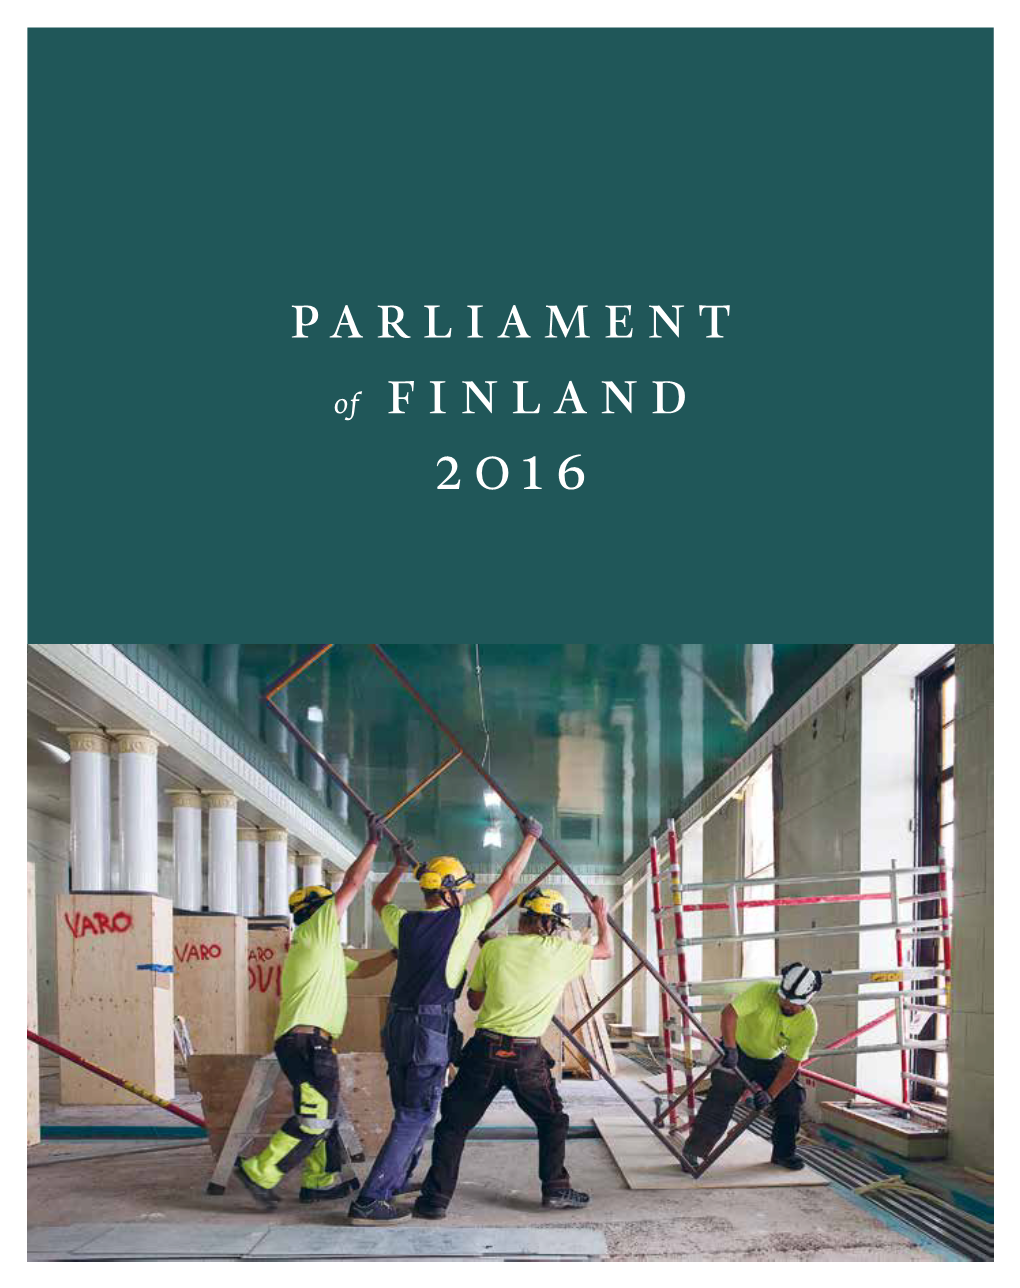 Parliament of Finland 2016